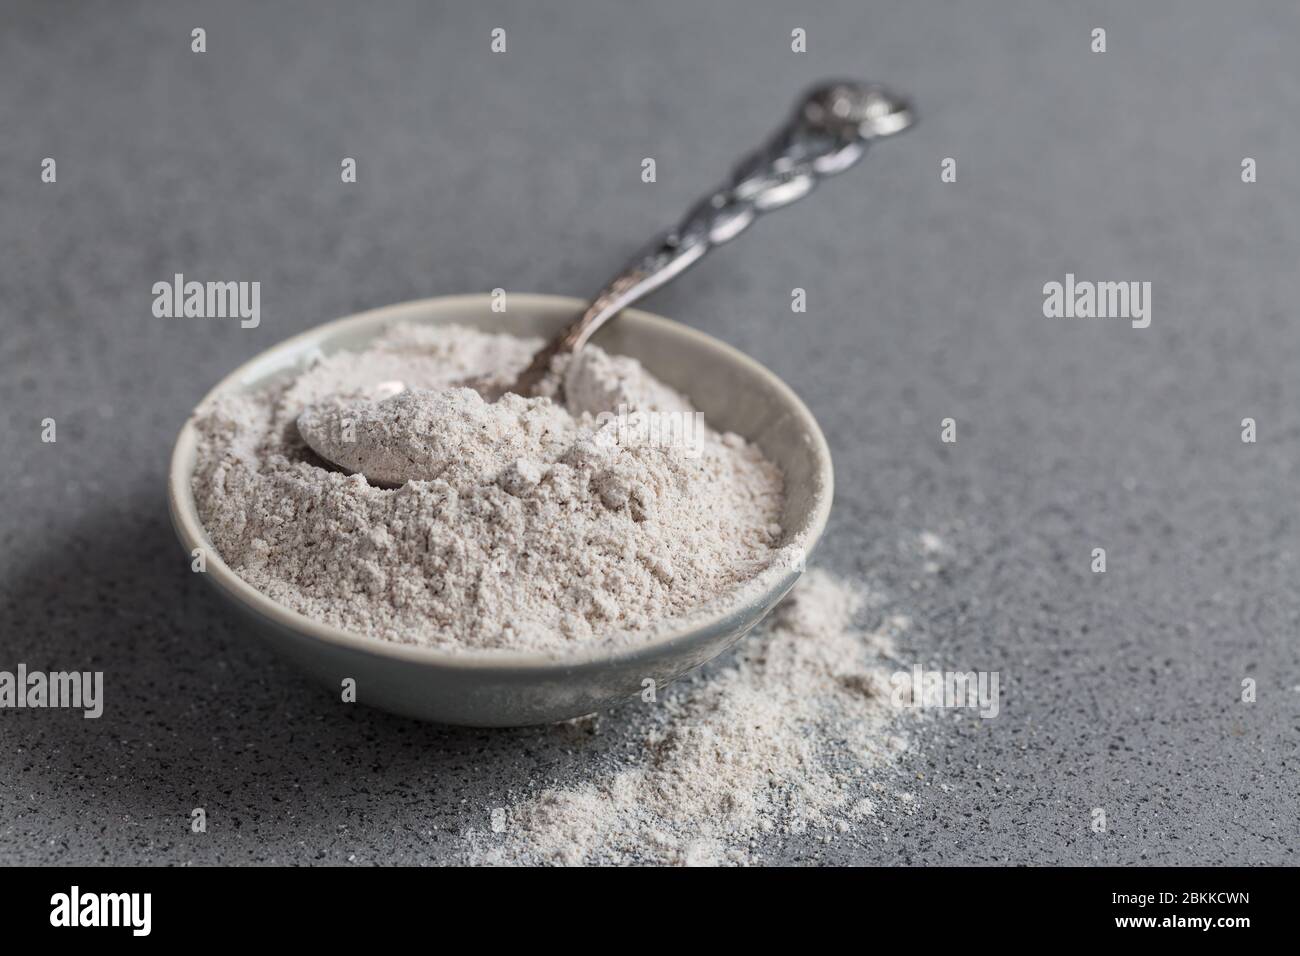 Glutenfree buckwheat flour for baking in the bowl on grey background Stock Photo